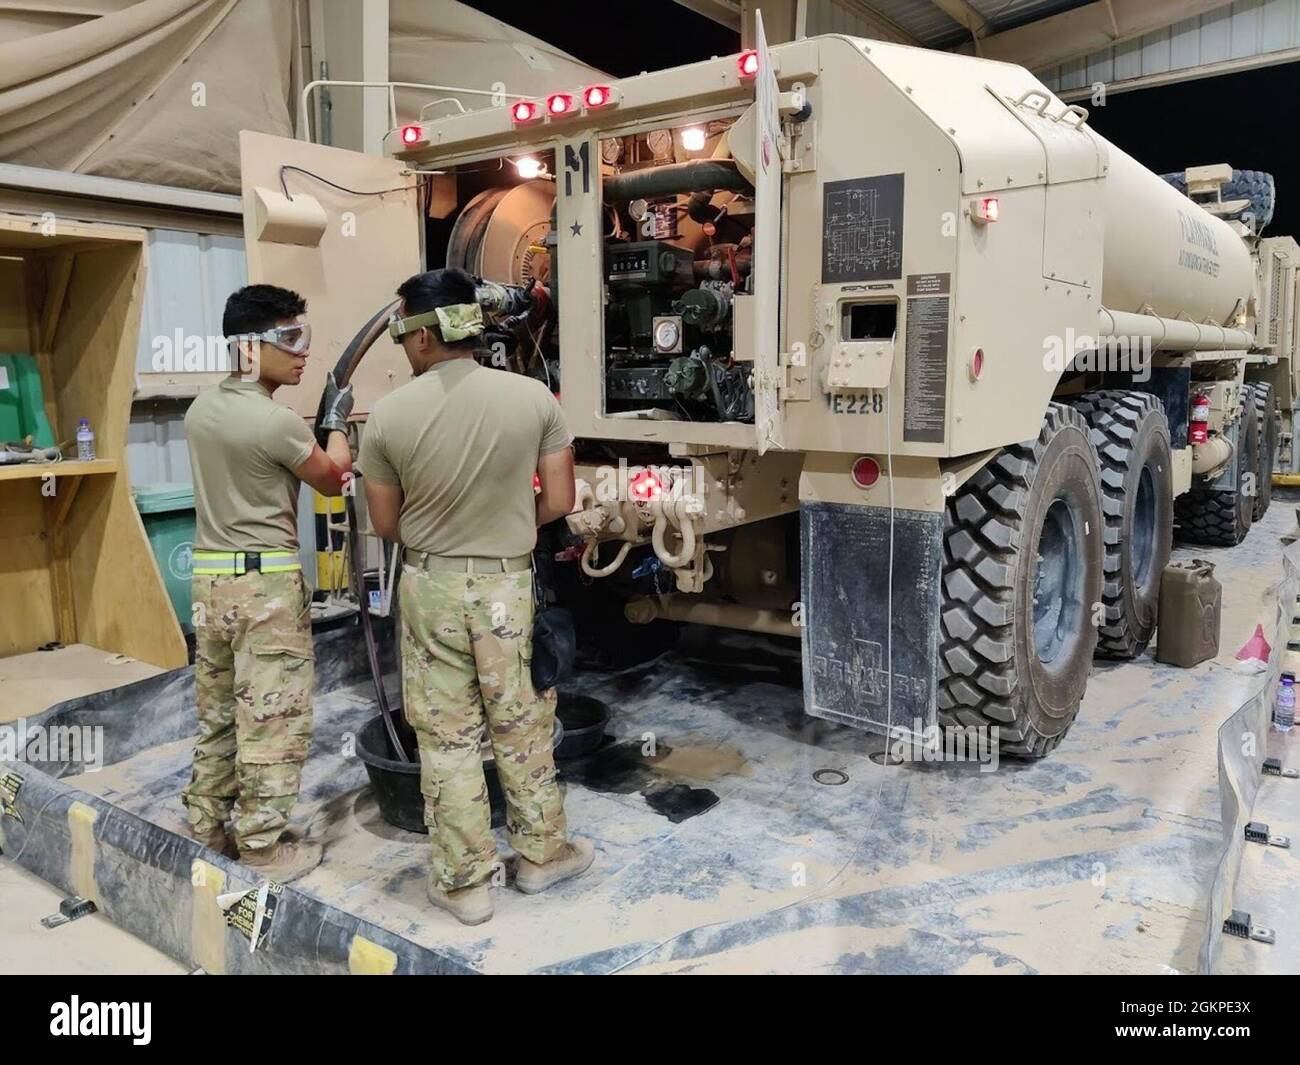 Spc. Rogelio Chavez and Spc. Marvin Caparas, from E Company, 1st Battalion, 168th Aviation Regiment (General Support Aviation Battalion), recirculate the fuel in a Heavy Expanded Mobility Tactical Truck (HEMTT) on the night shift at the motor pool at Camp Buehring, Kuwait. The fuel is recirculated to remove condensation and contaminants before fueling aircraft. Stock Photo